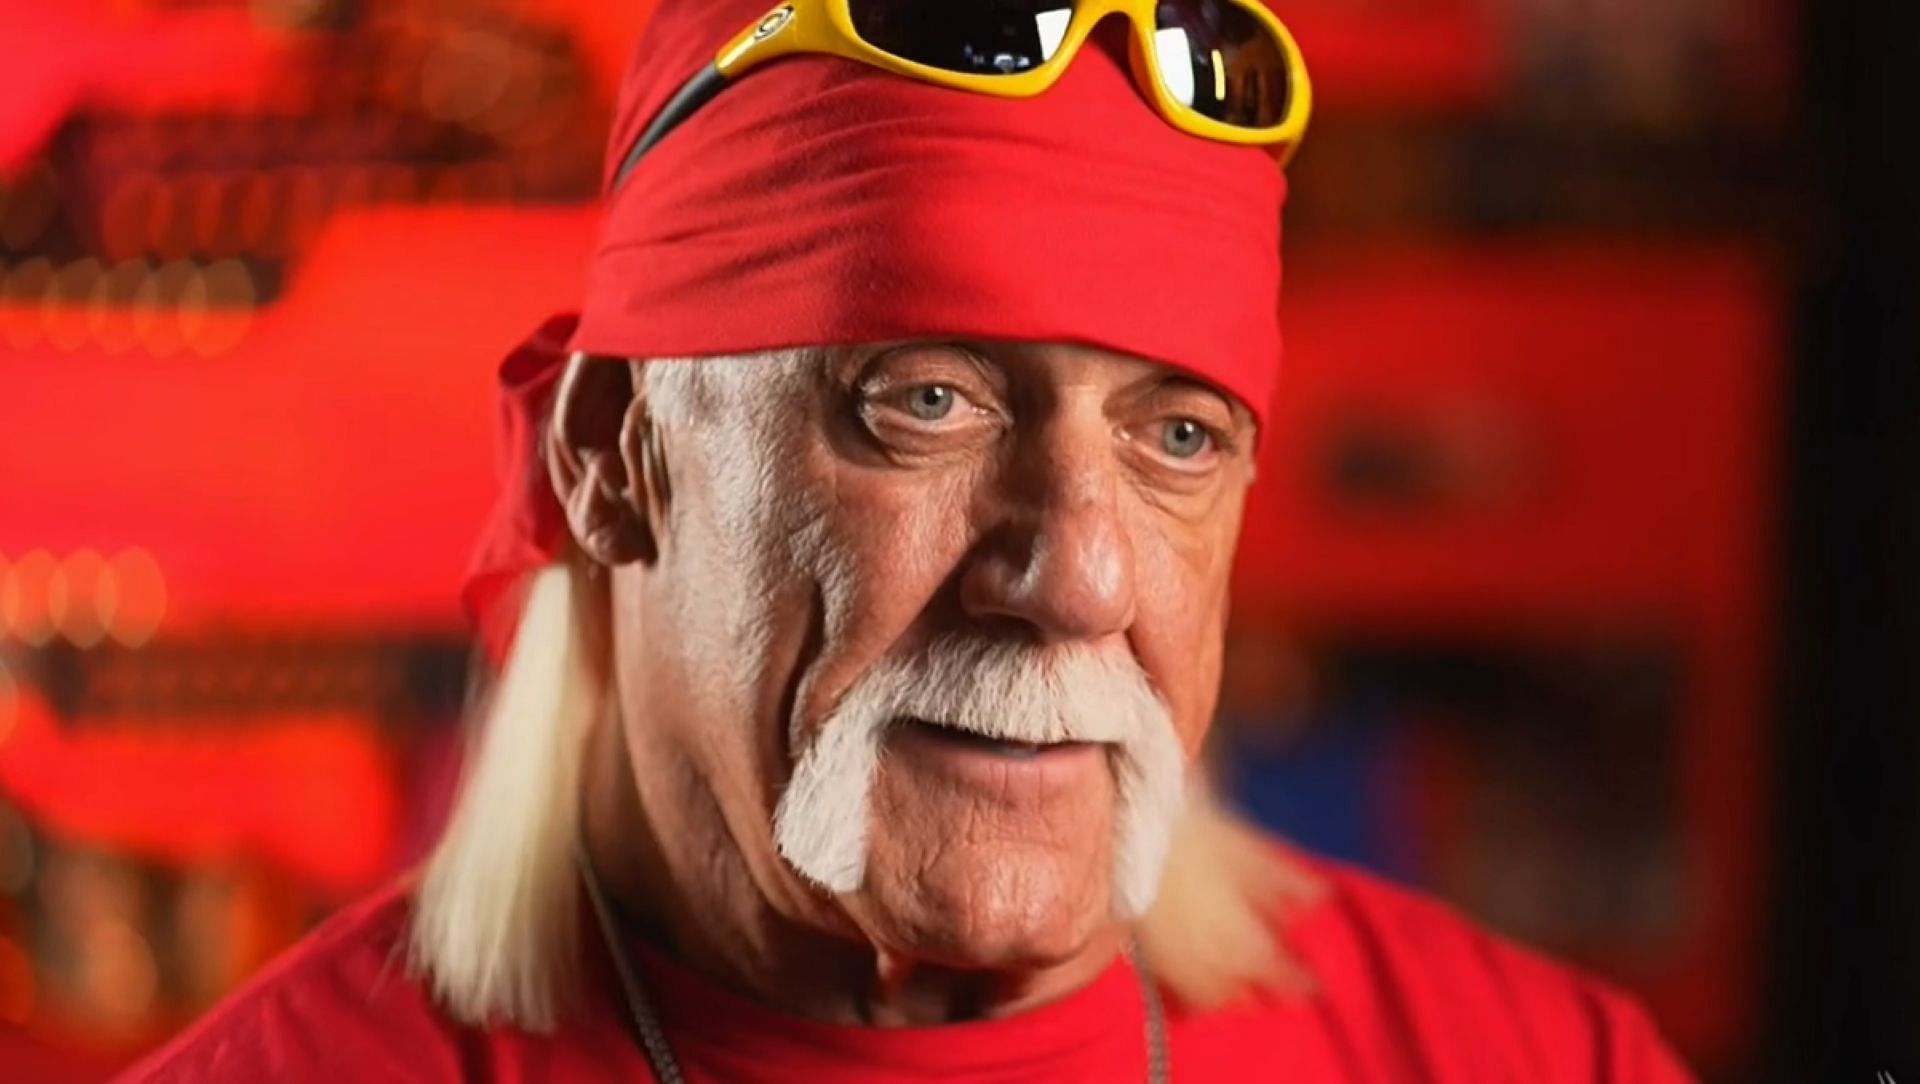 Hulk Hogan is one of the most legendary performers in wrestling history.